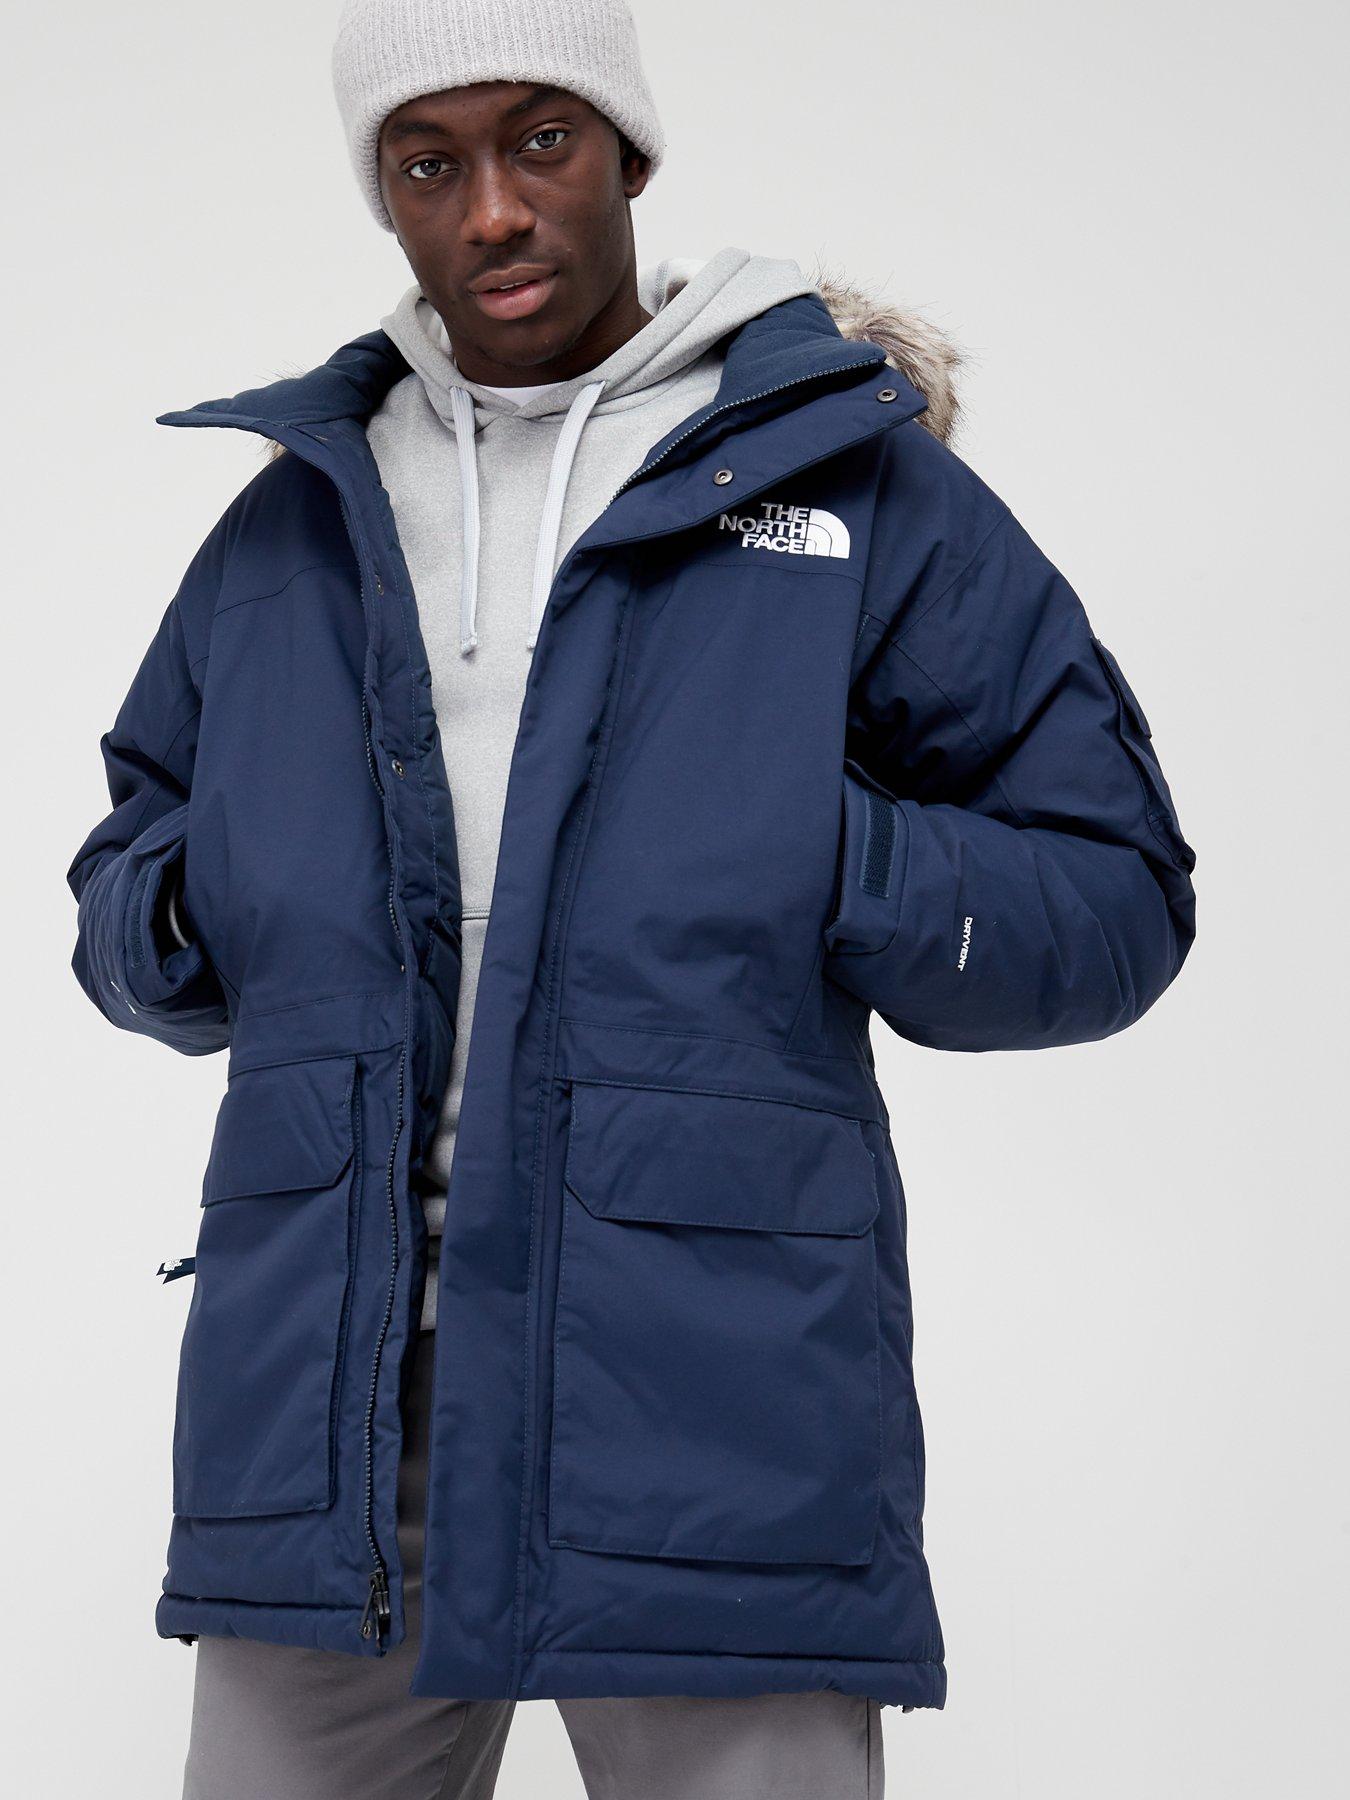 The North Face Coats in Blue for Men Mens Jackets The North Face Jackets 